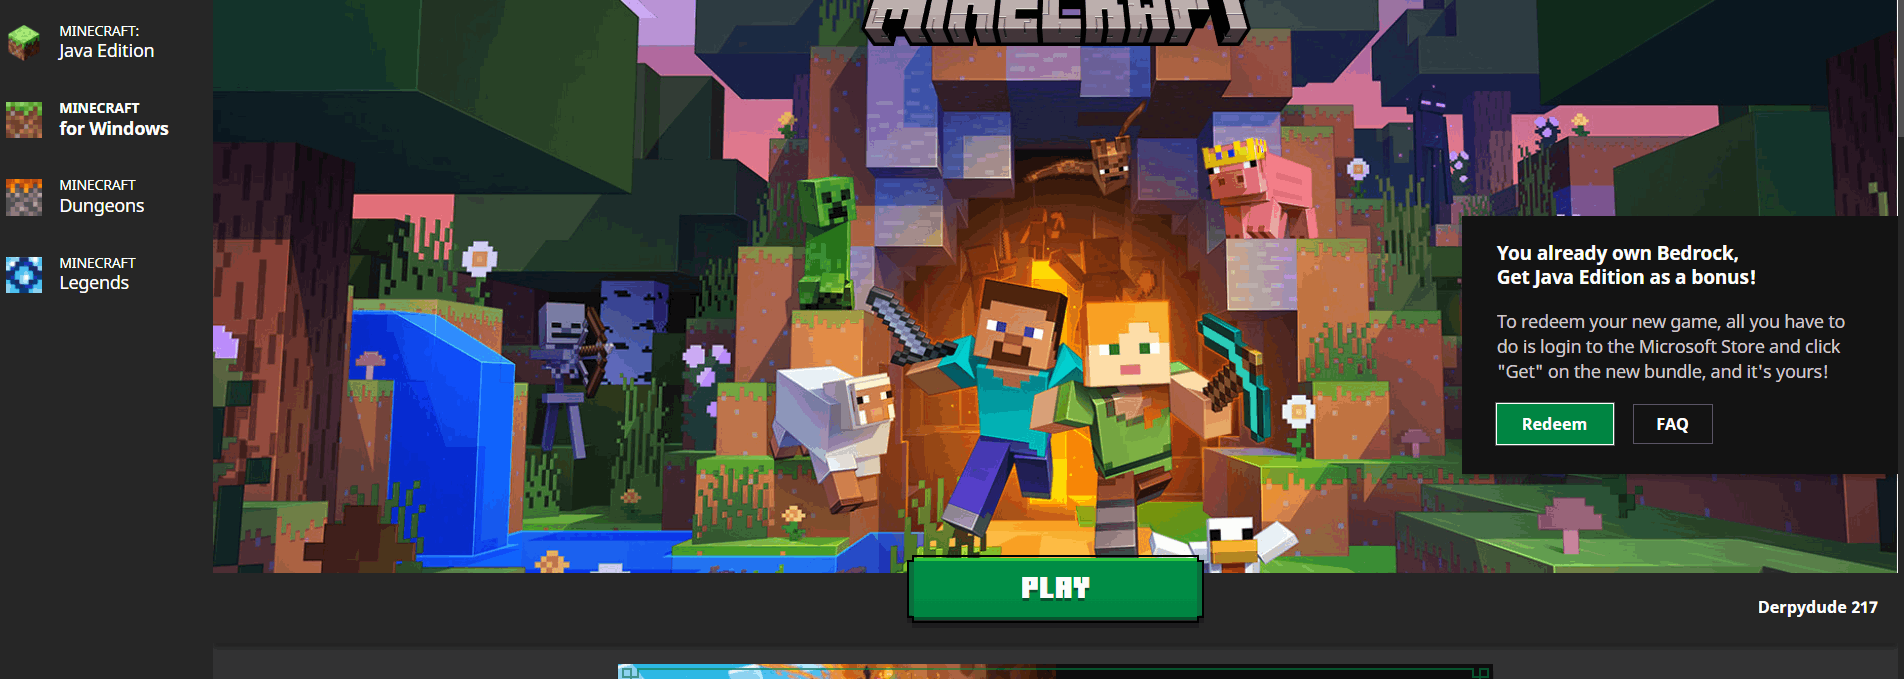 I tried to redeem Minecraft Java edition with the bundle since I